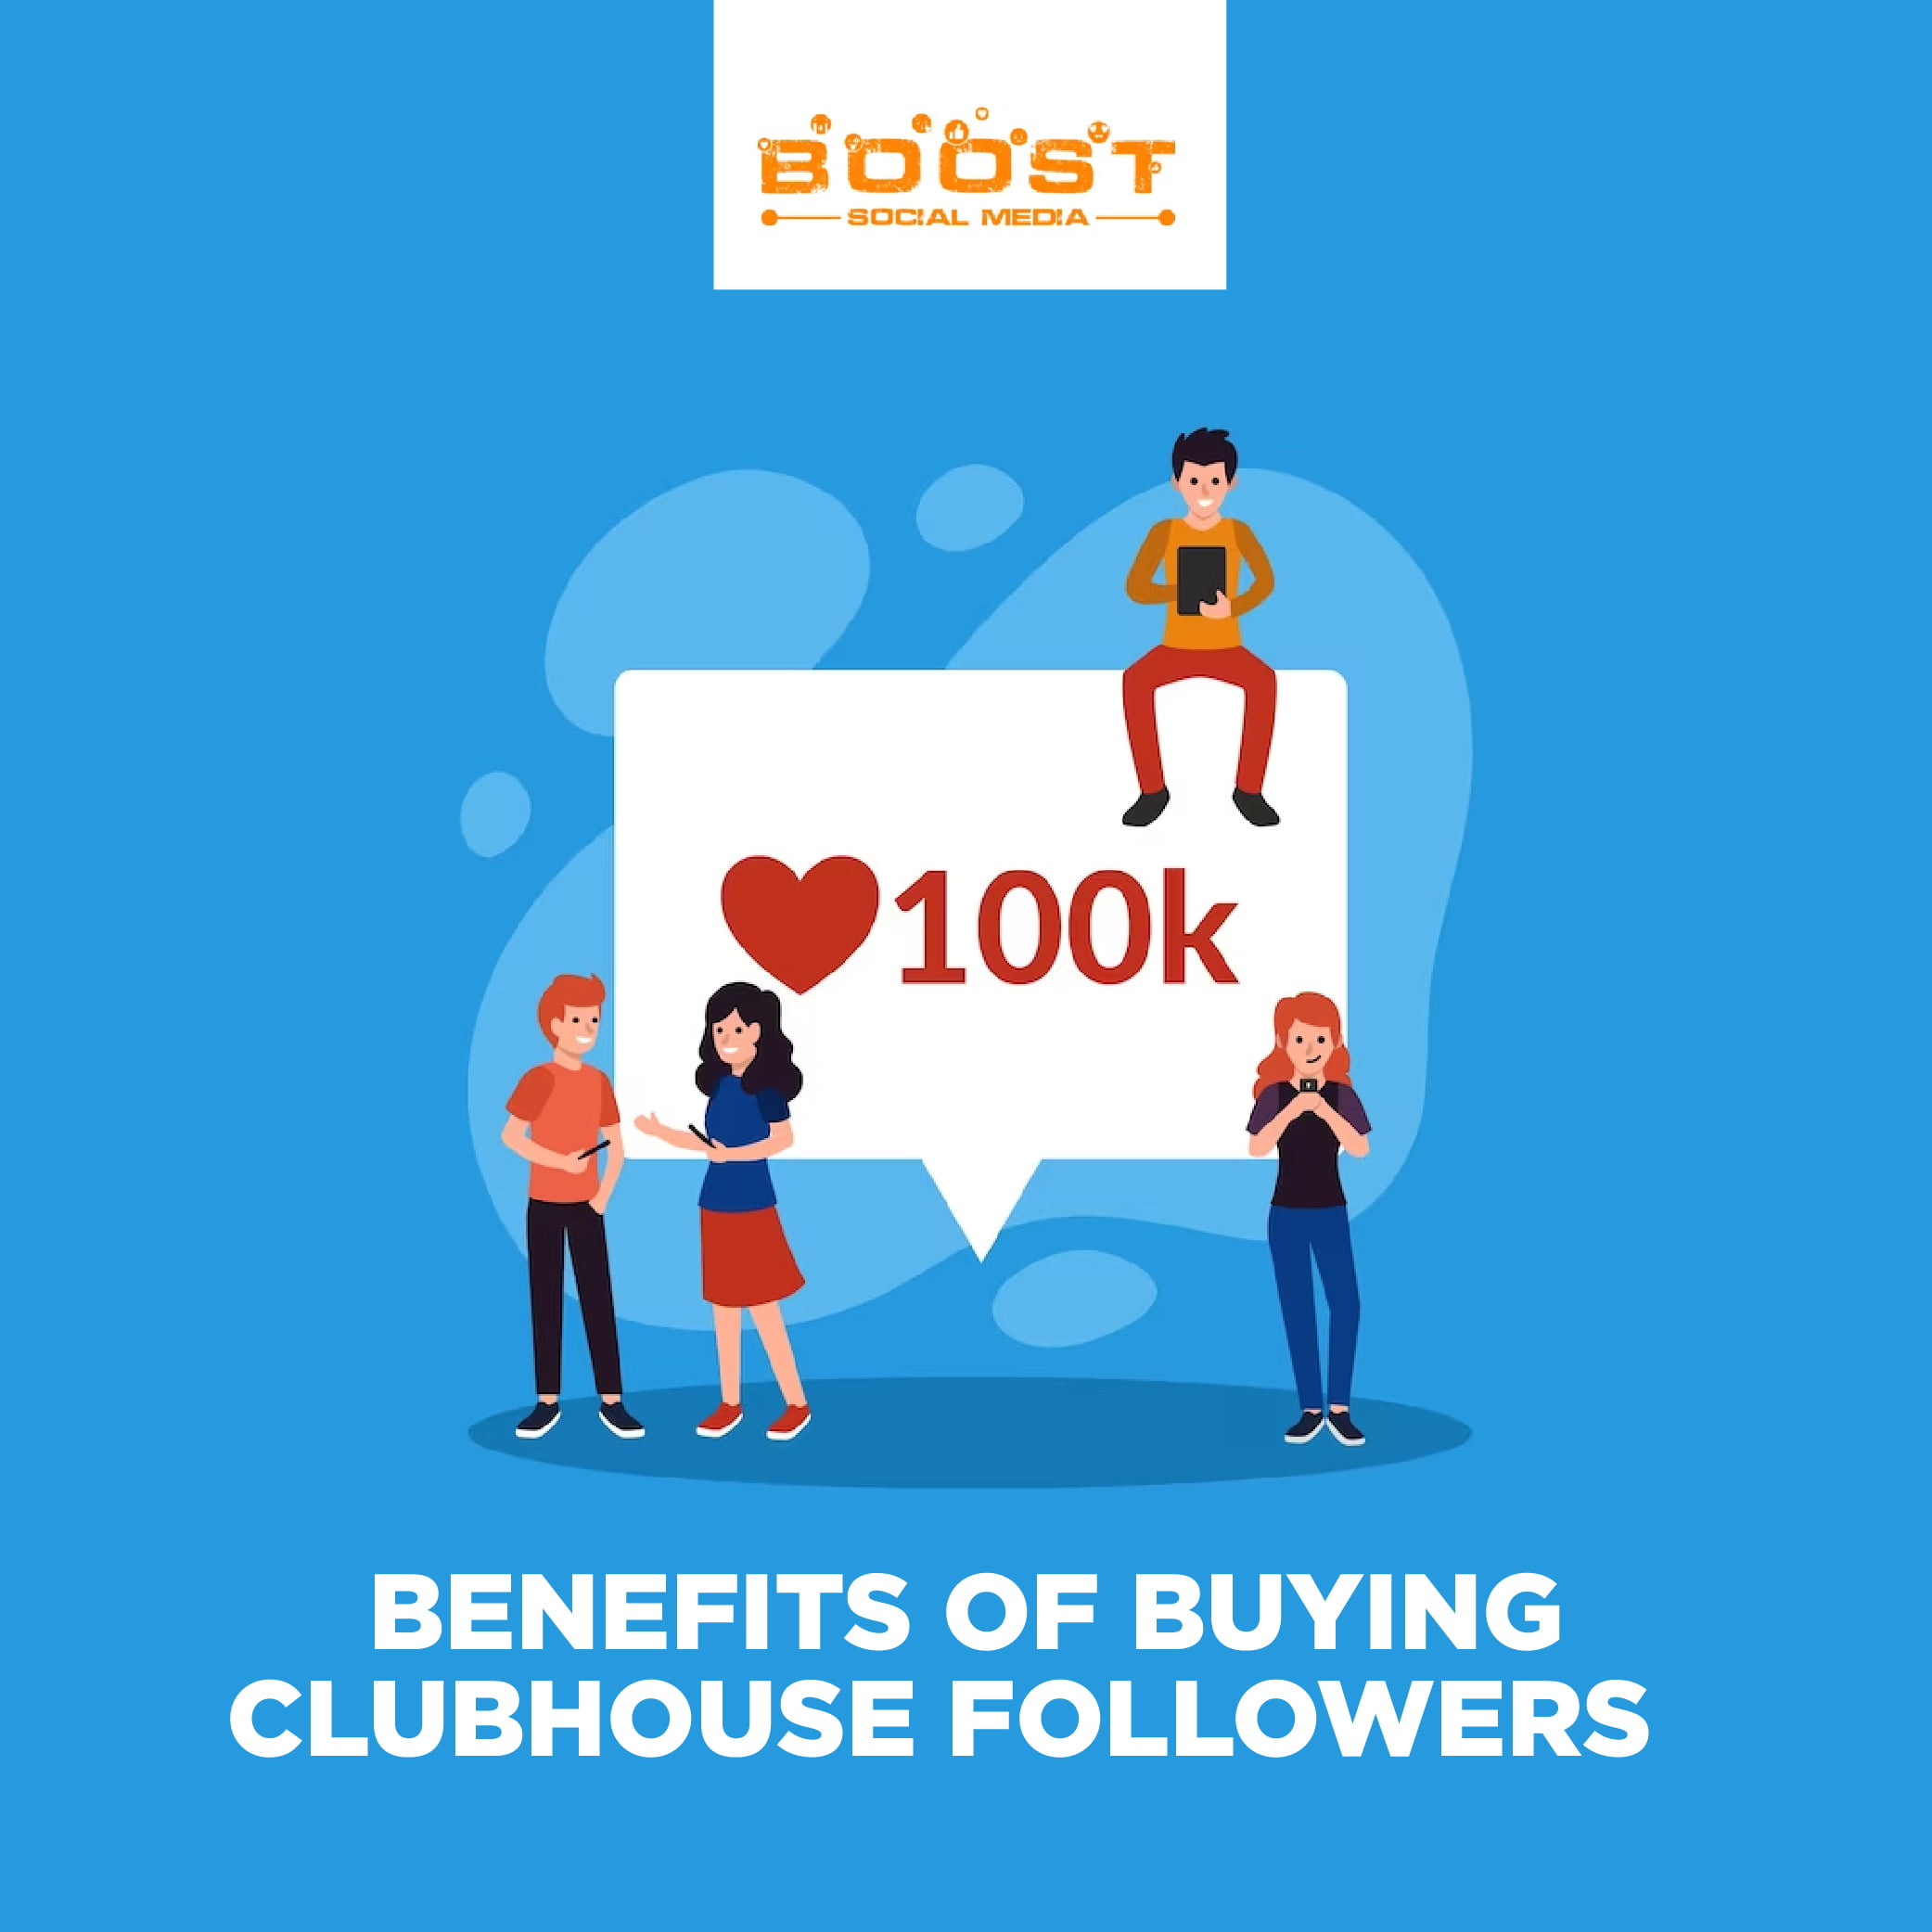 Benefits of Buying Clubhouse Followers